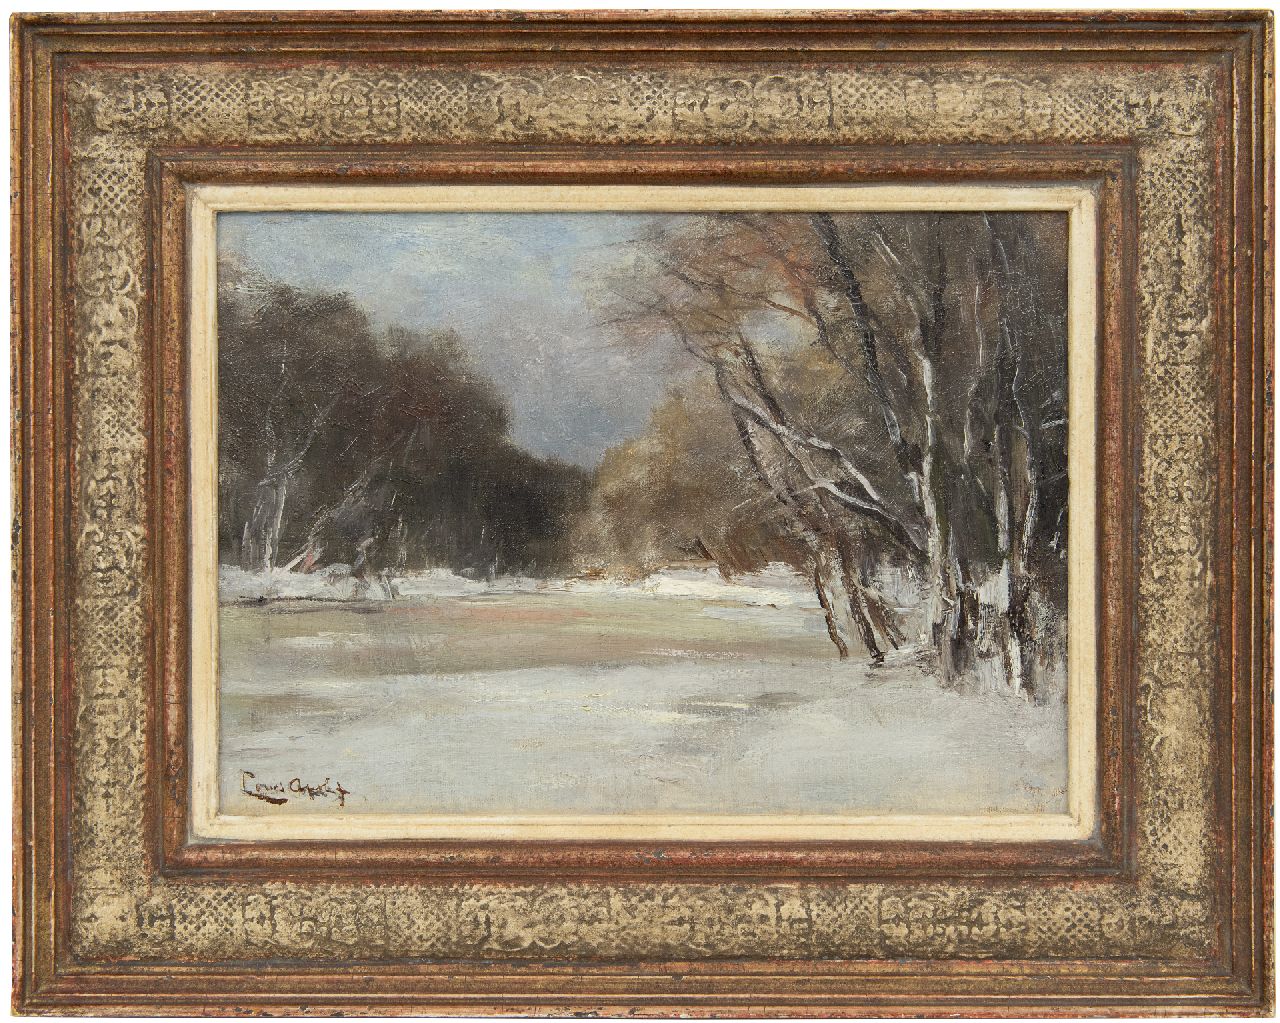 Apol L.F.H.  | Lodewijk Franciscus Hendrik 'Louis' Apol | Paintings offered for sale | A snowy forest pond, oil on canvas laid down on panel 25.6 x 35.8 cm, signed l.l.